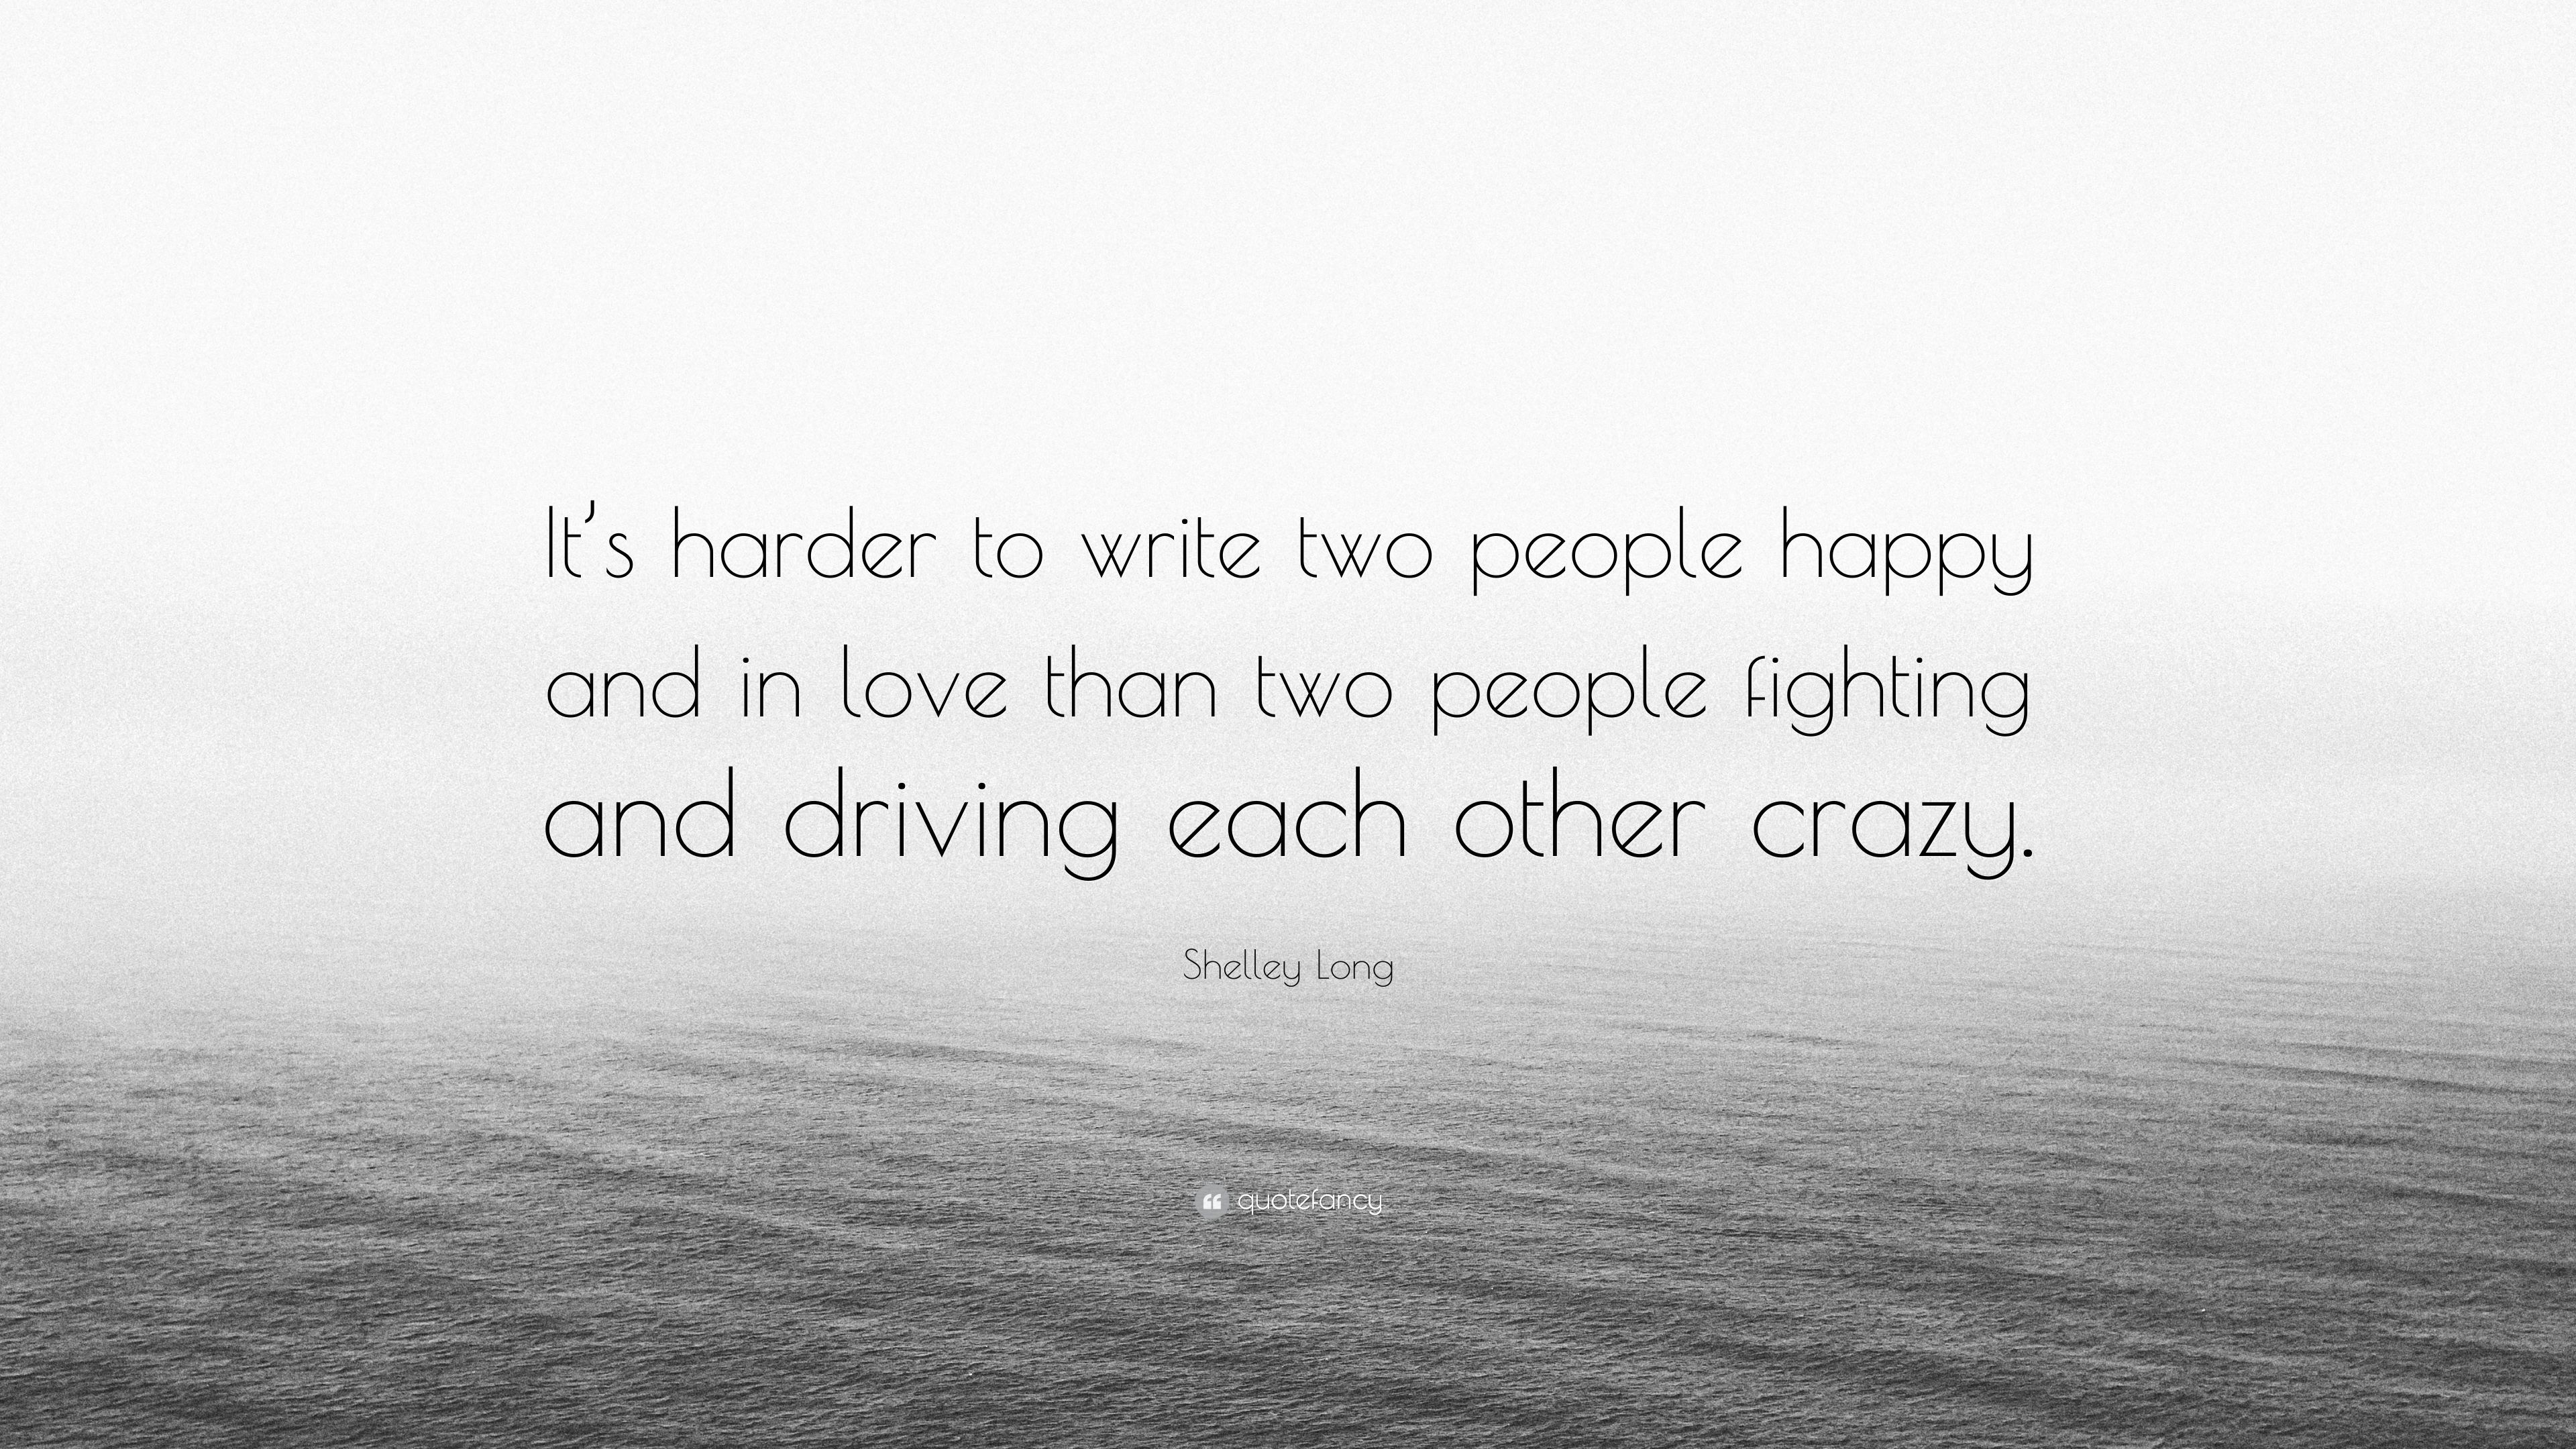 Shelley Long Quote: "It's harder to write two people happy and in...